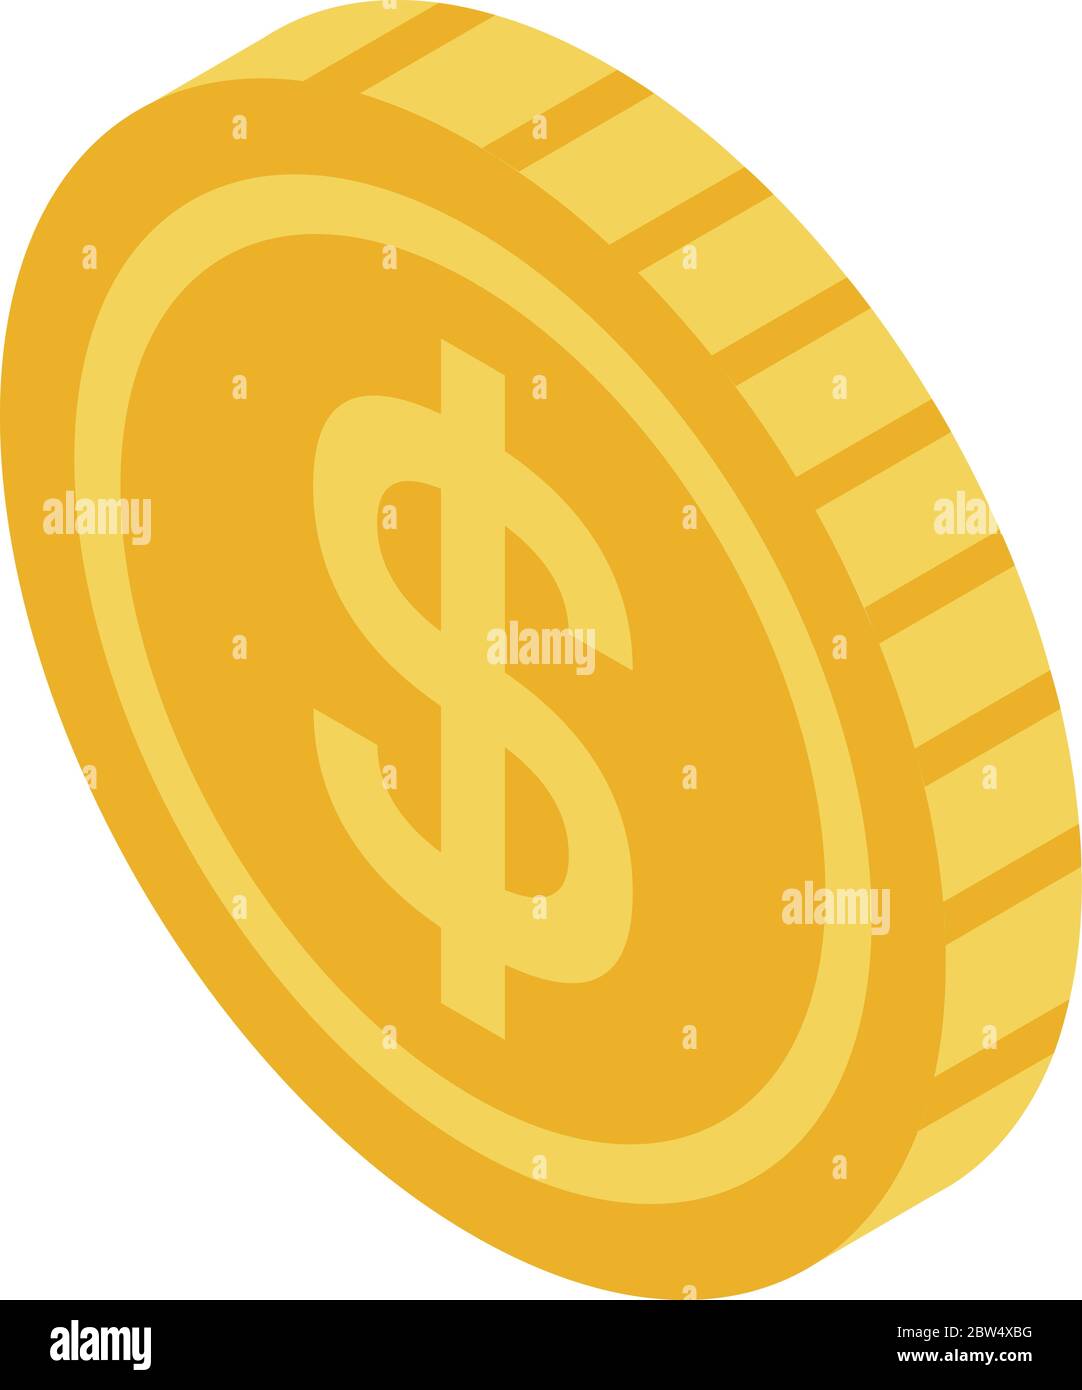 Dollar coin icon, isometric style Stock Vector